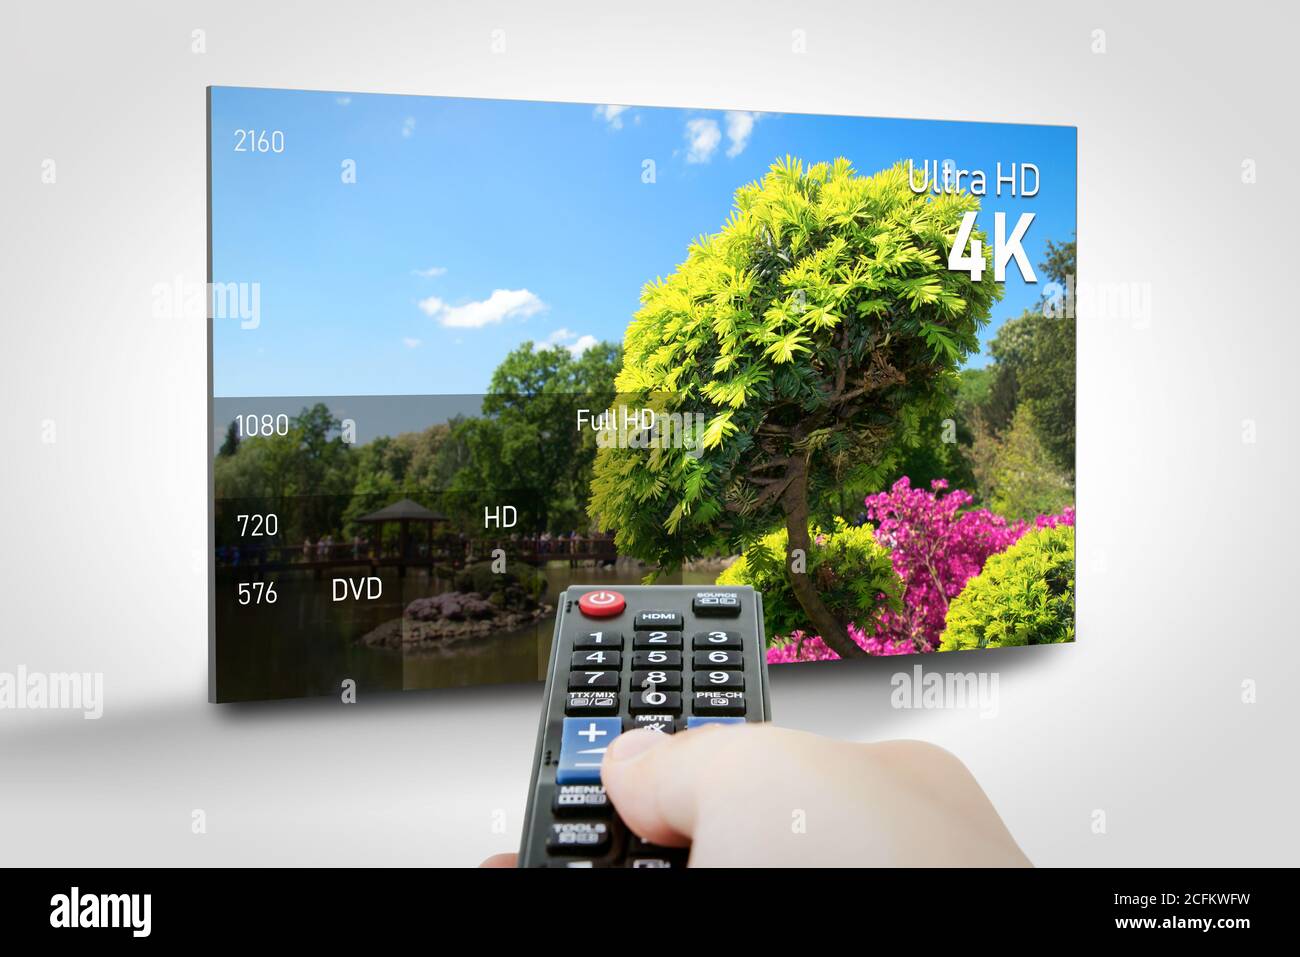 4K resolution display with comparison of resolutions. TV screen panel conceptual graphic. Stock Photo